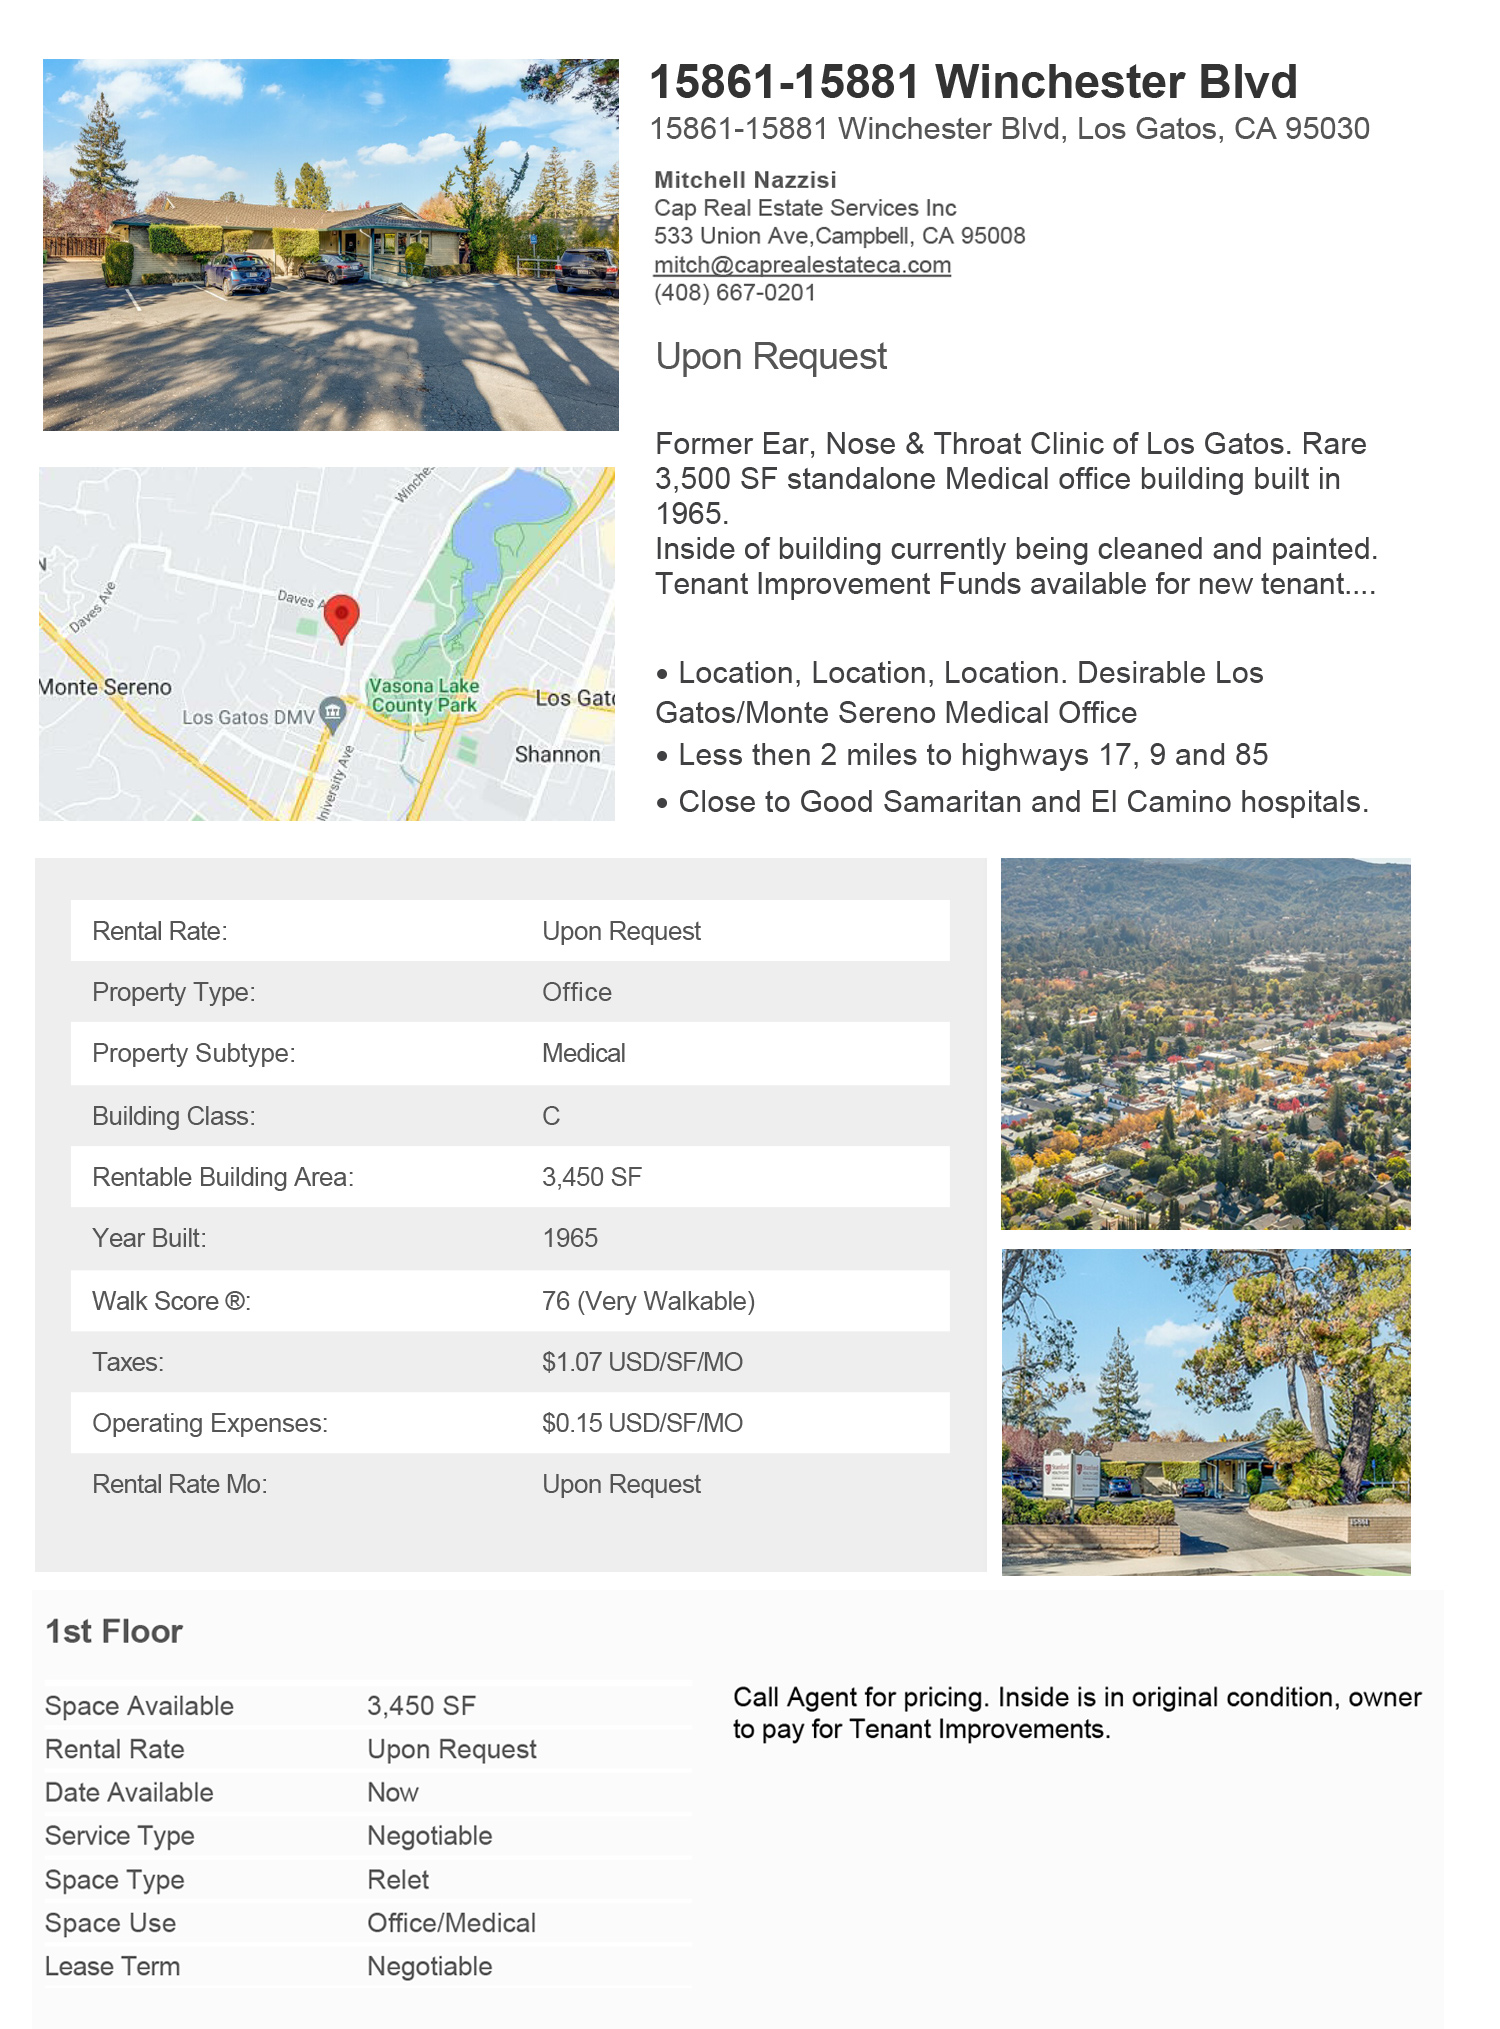 Commercial Suites for lease in San Jose on Winchester